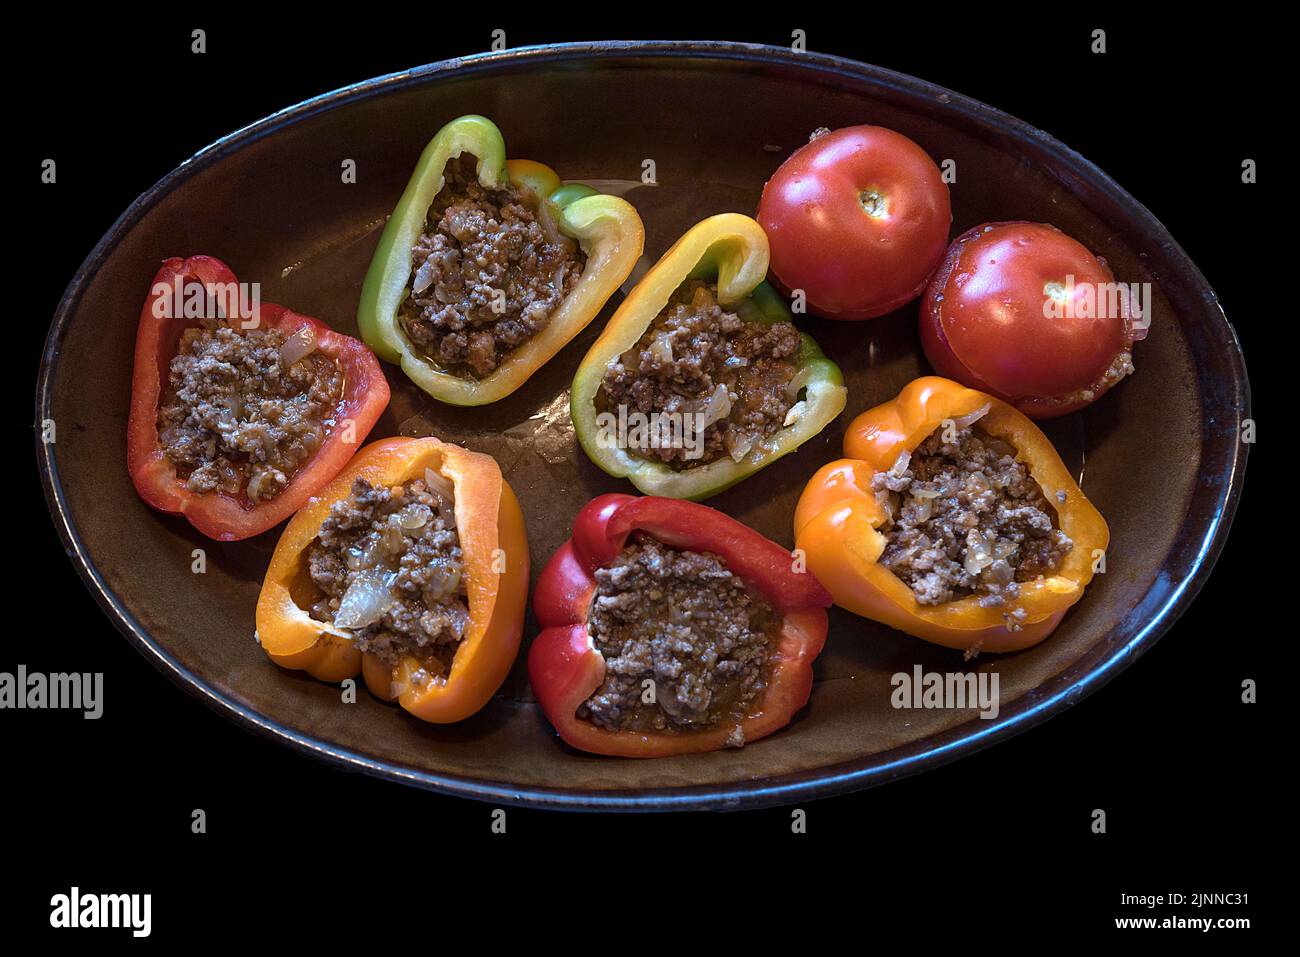 Stuffed peppers and tomatoes in a casserole on a black background, Bavaria, Germany Stock Photo